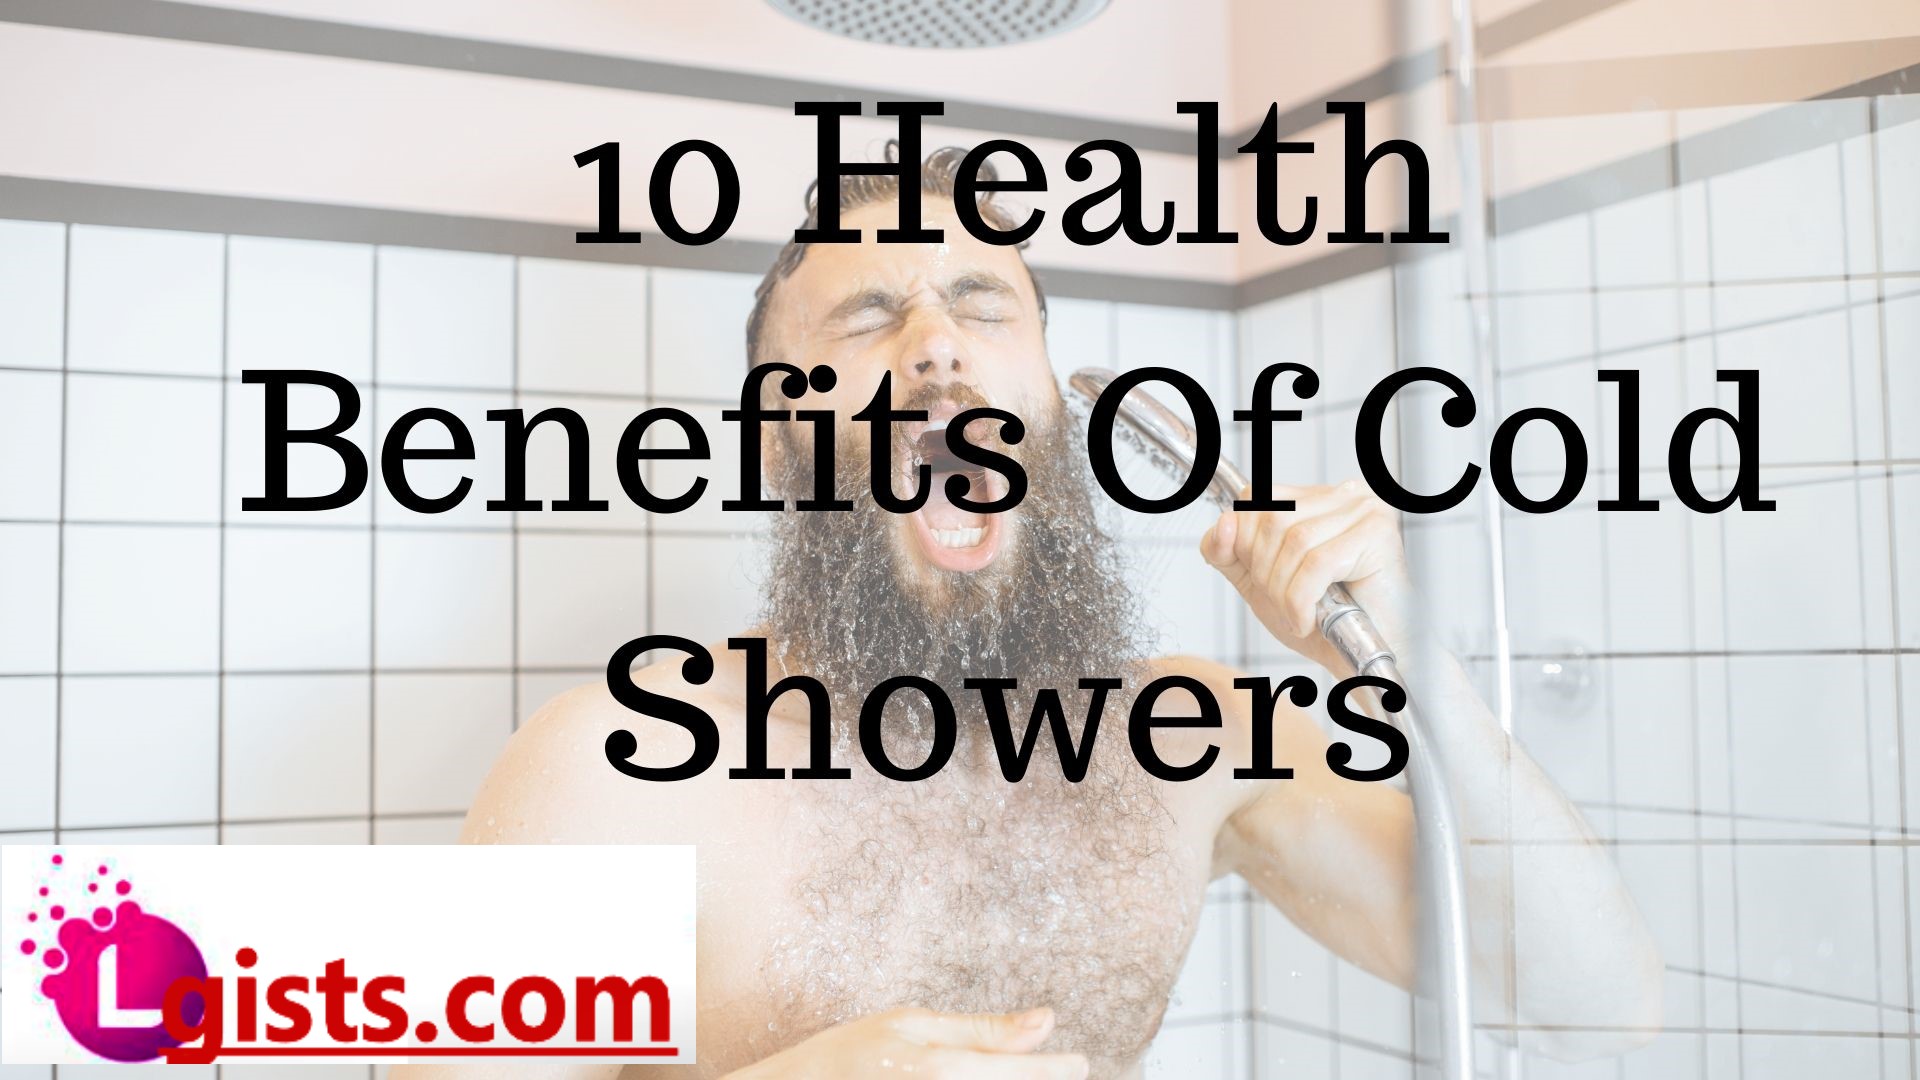 Benefits of Cold Water: Advantages and Disadvantages